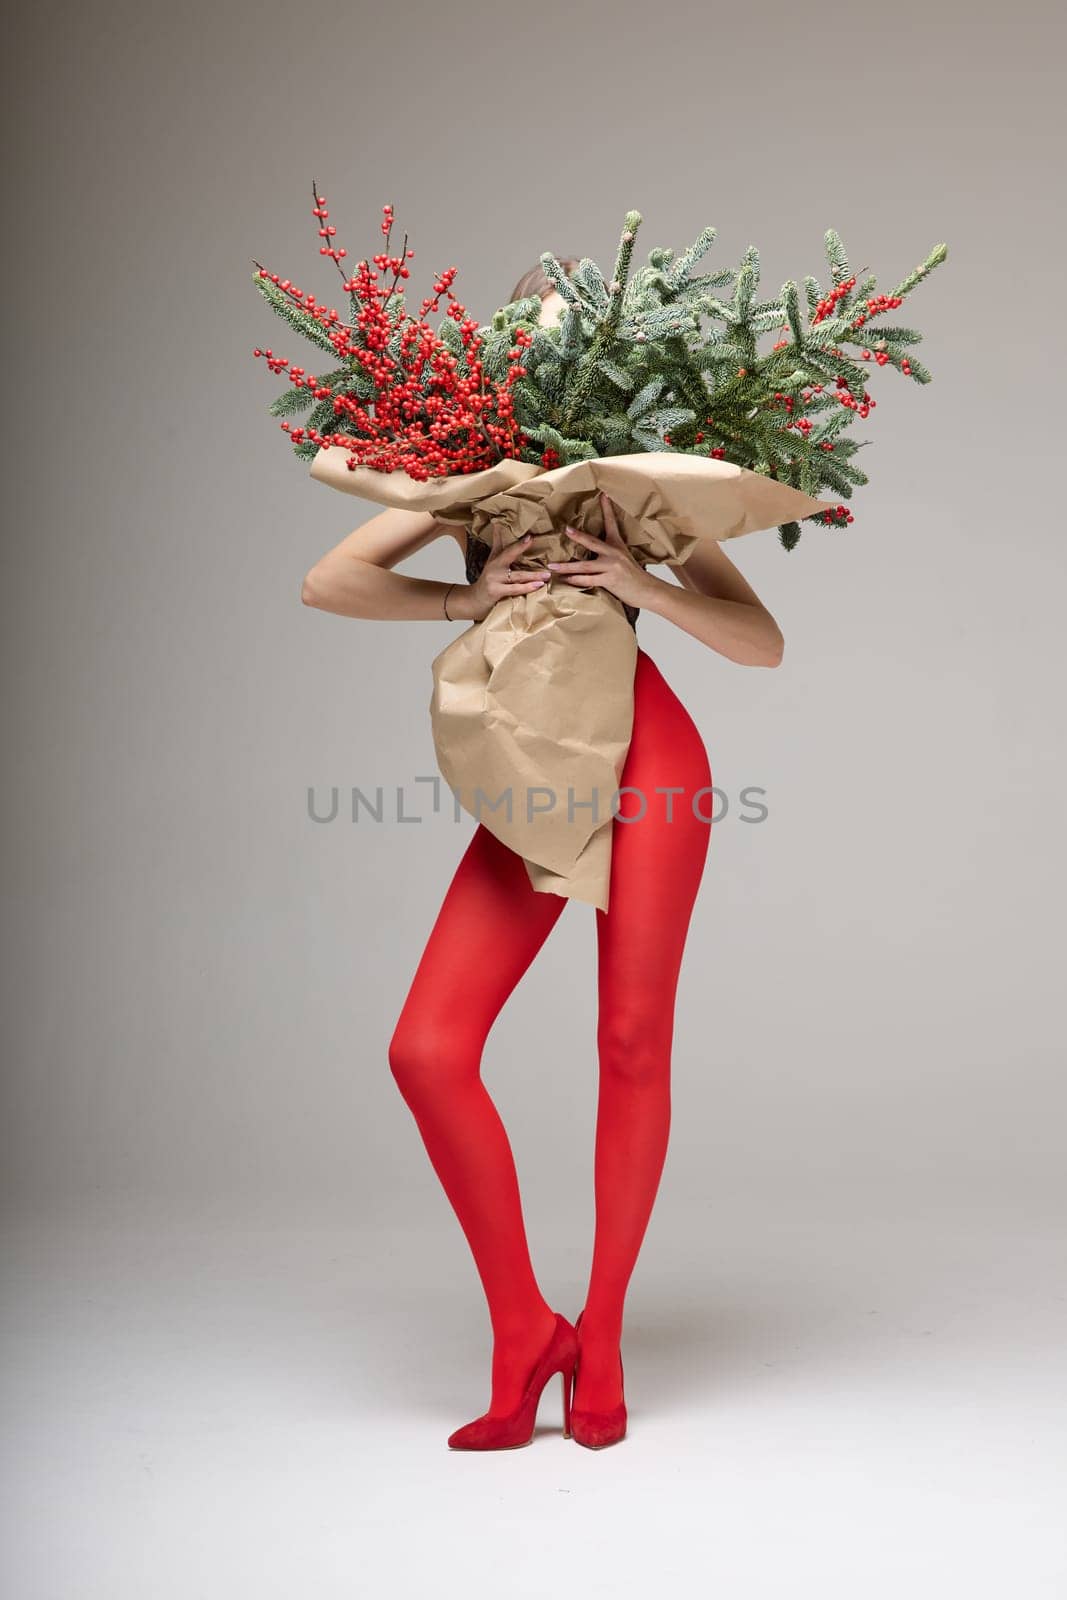 A long girl in red tights and high-heeled shoes holds a huge bouquet of fir branches and red berries wrapped in cardboard paper, she closes with a bouquet, photo studio with white background. High quality 4k footage